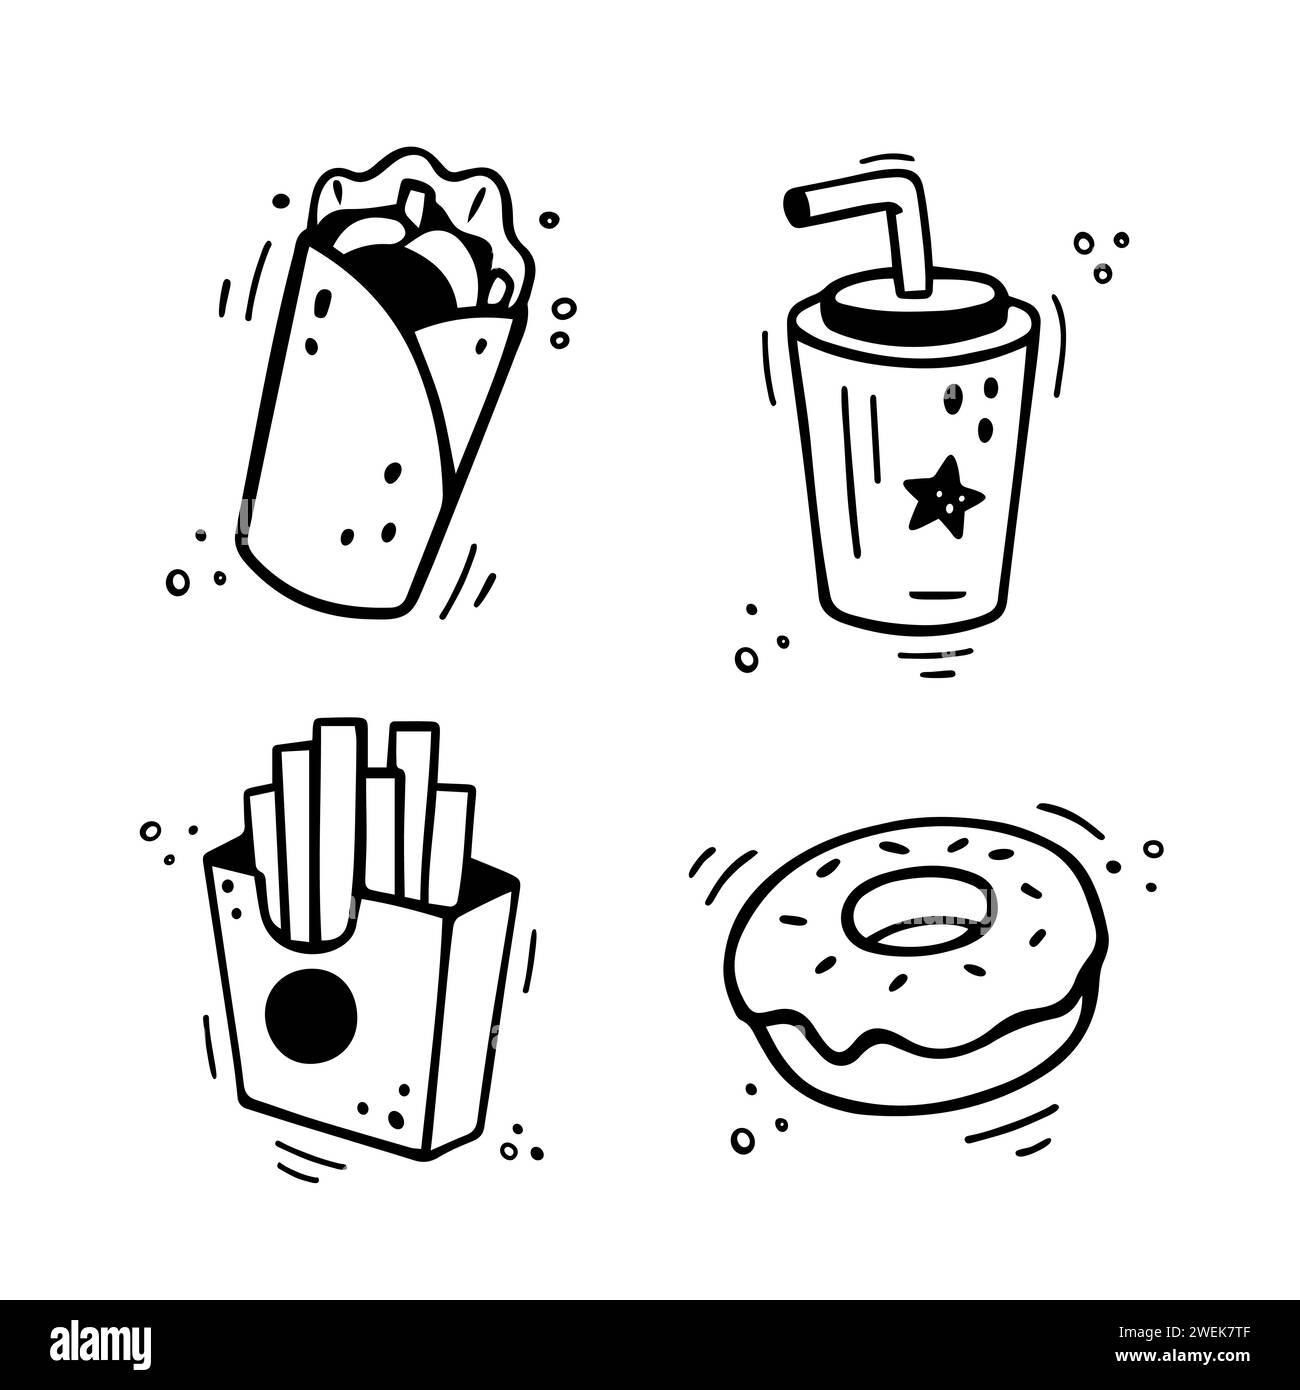 Fast food icons set - shawarma, burrito, French fries, paper cup with drink, donut. Hand drawn fast food combo. Comic doodle style. Colorful snacks drawn with felt tip pen. Vector illustration Stock Vector